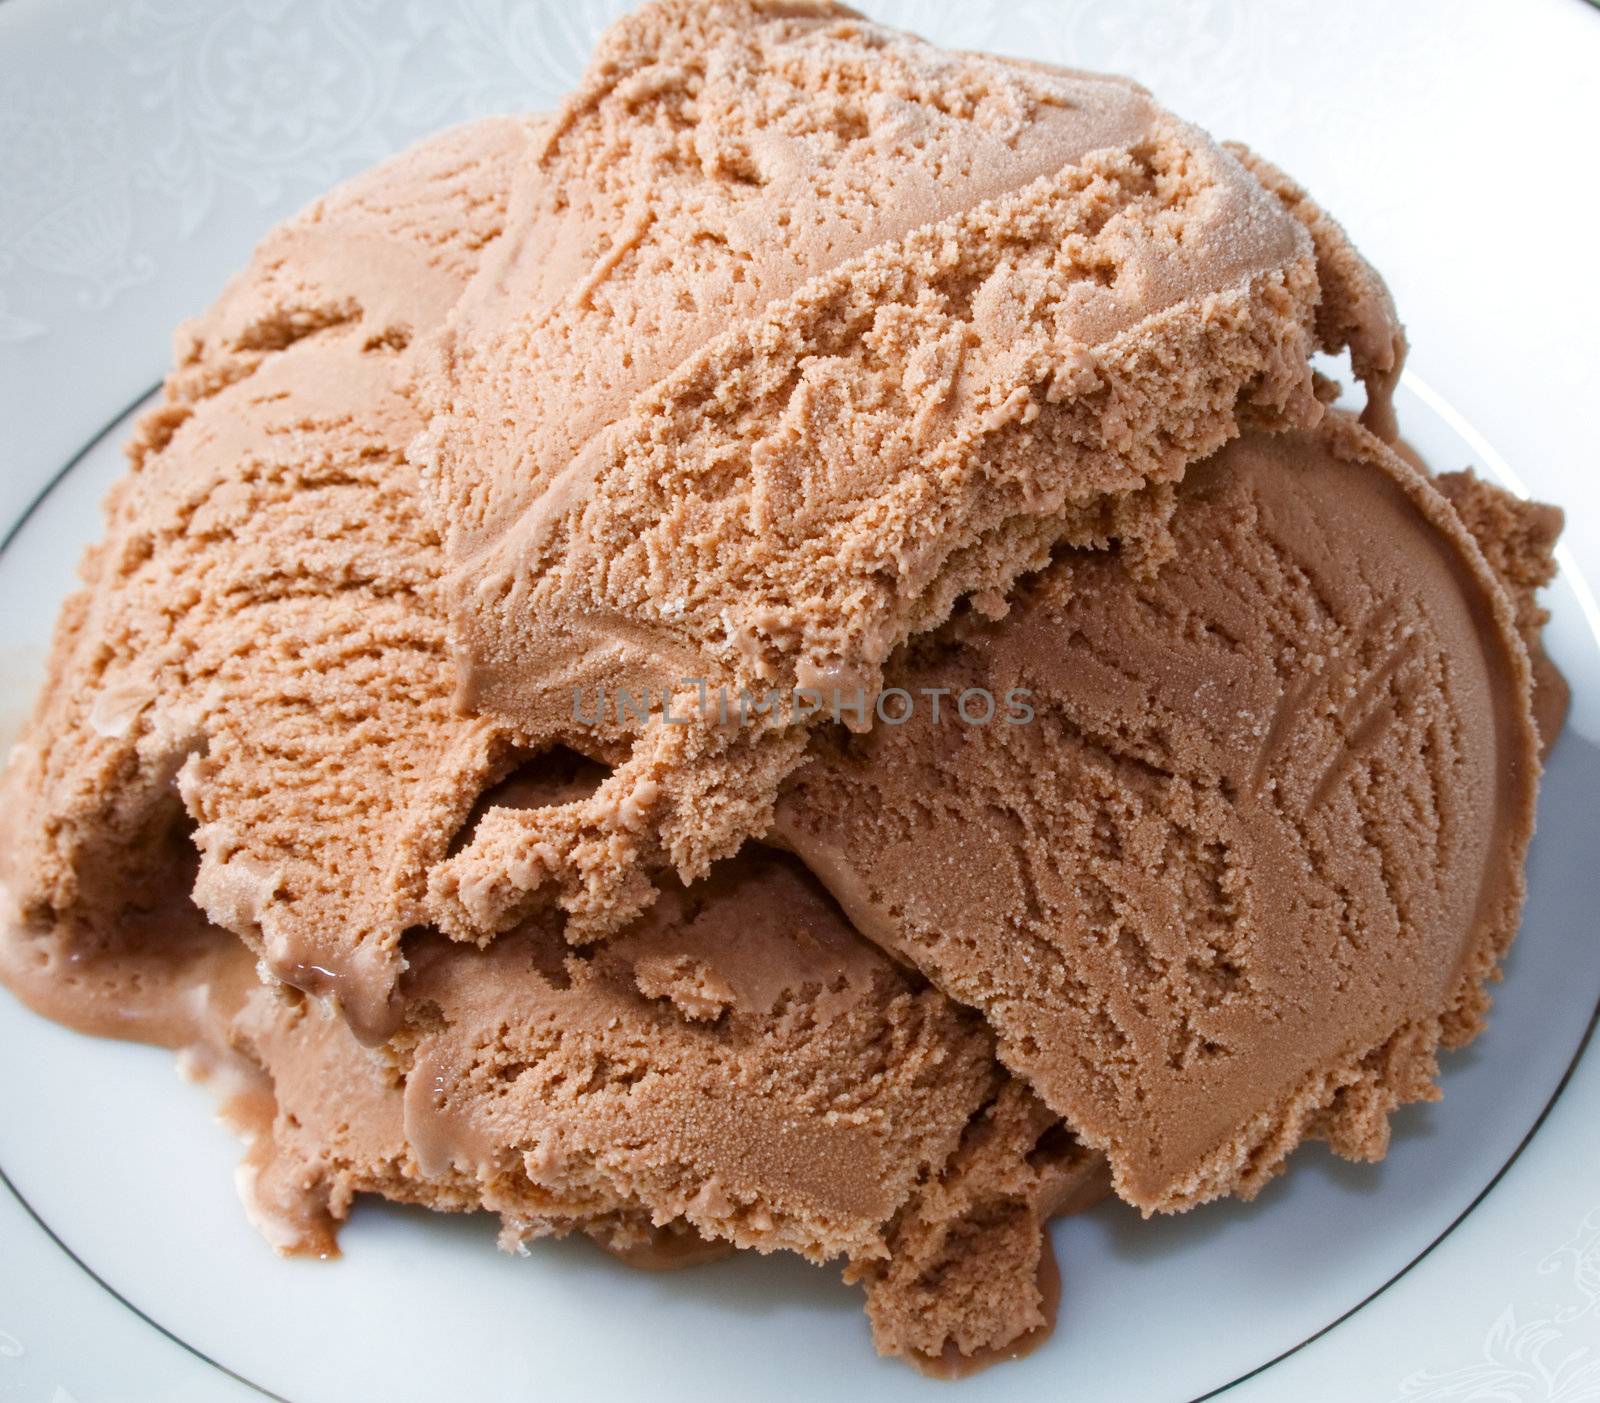 Chocolate ice cream ready to eat or serve